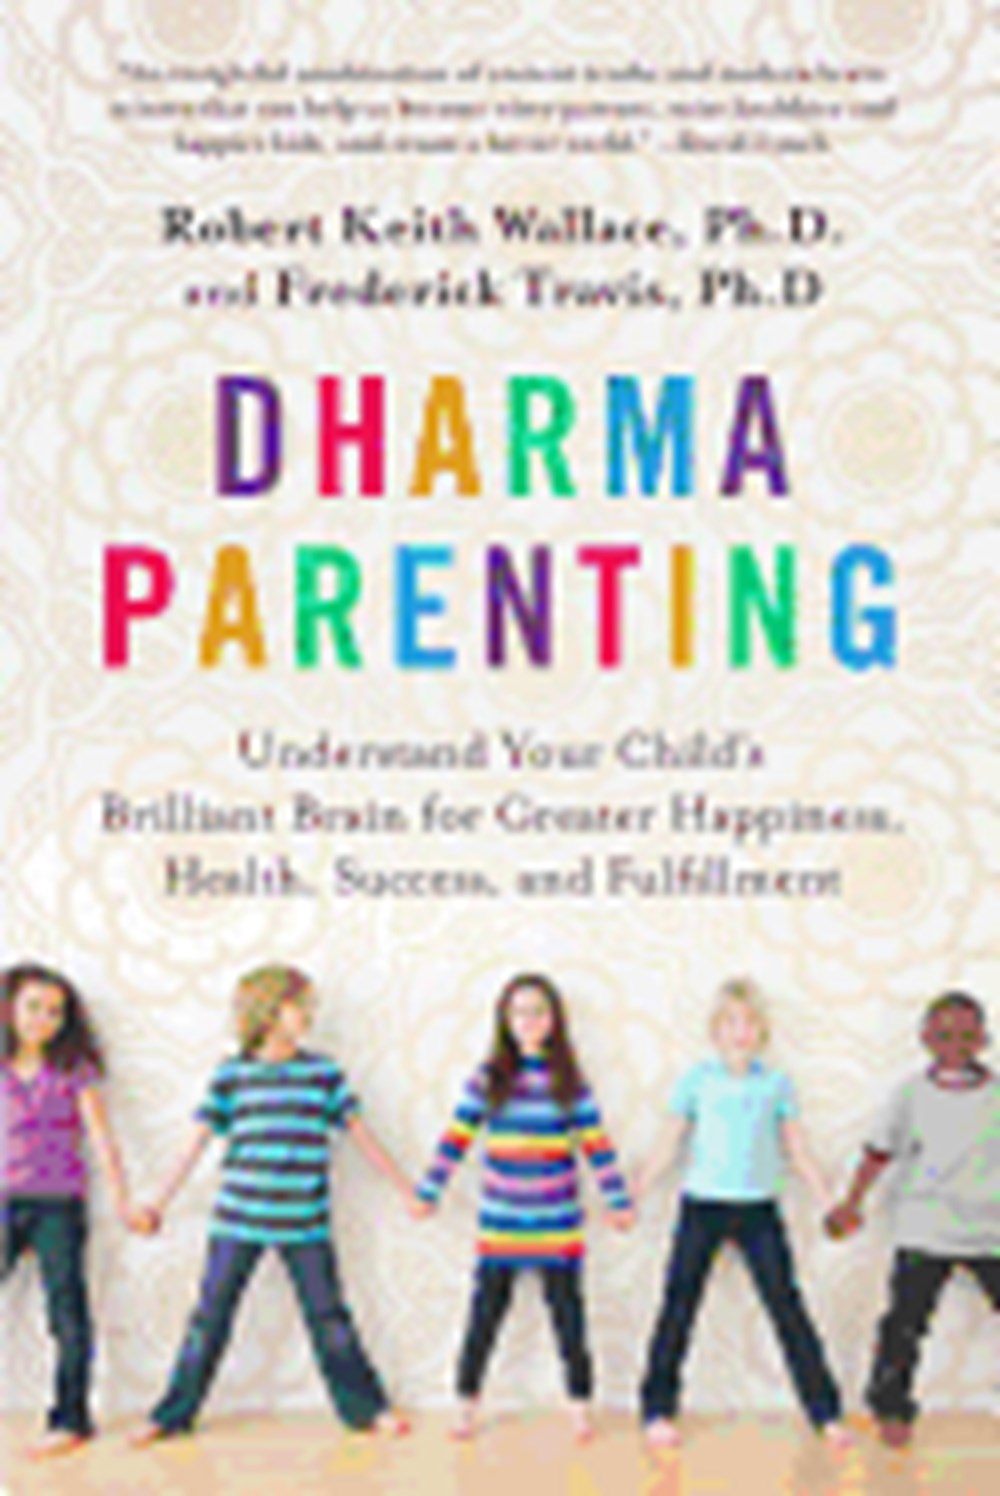 Dharma Parenting: Understand Your Child's Brilliant Brain for Greater Happiness, Health, Success, an